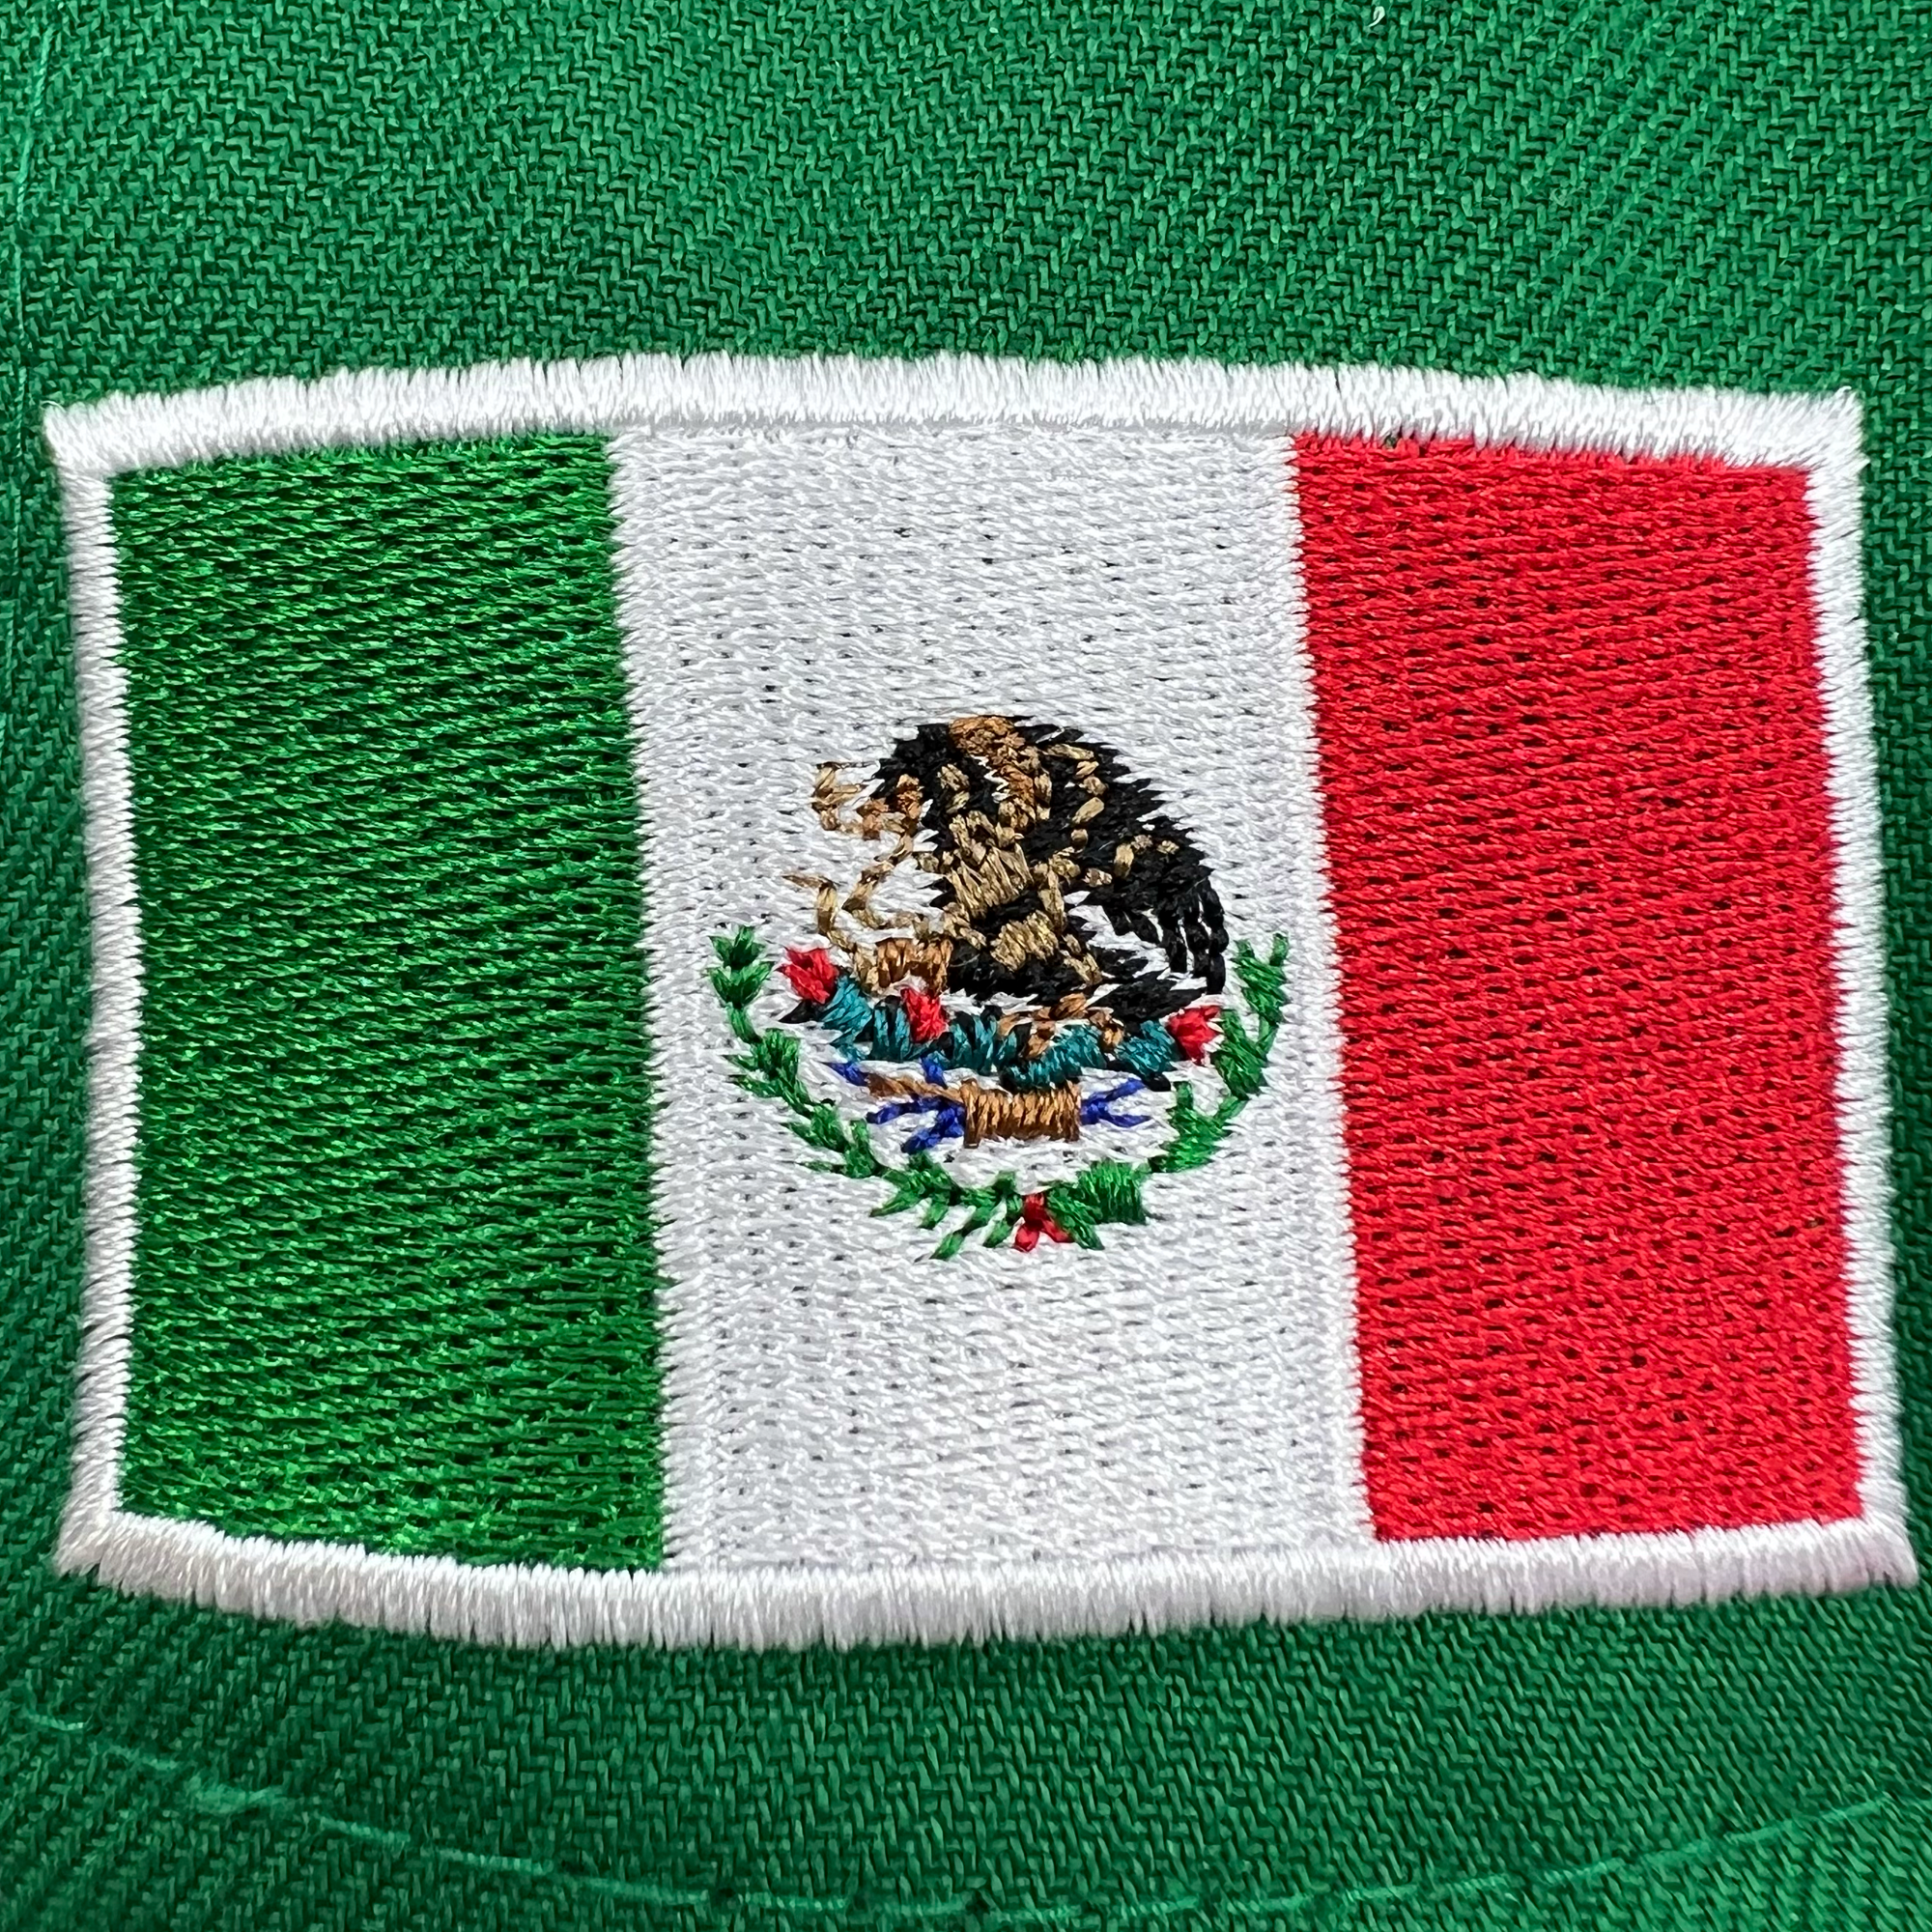 Detailed close-up of the embroidered Mexican flag patch on green fitted New Era cap.